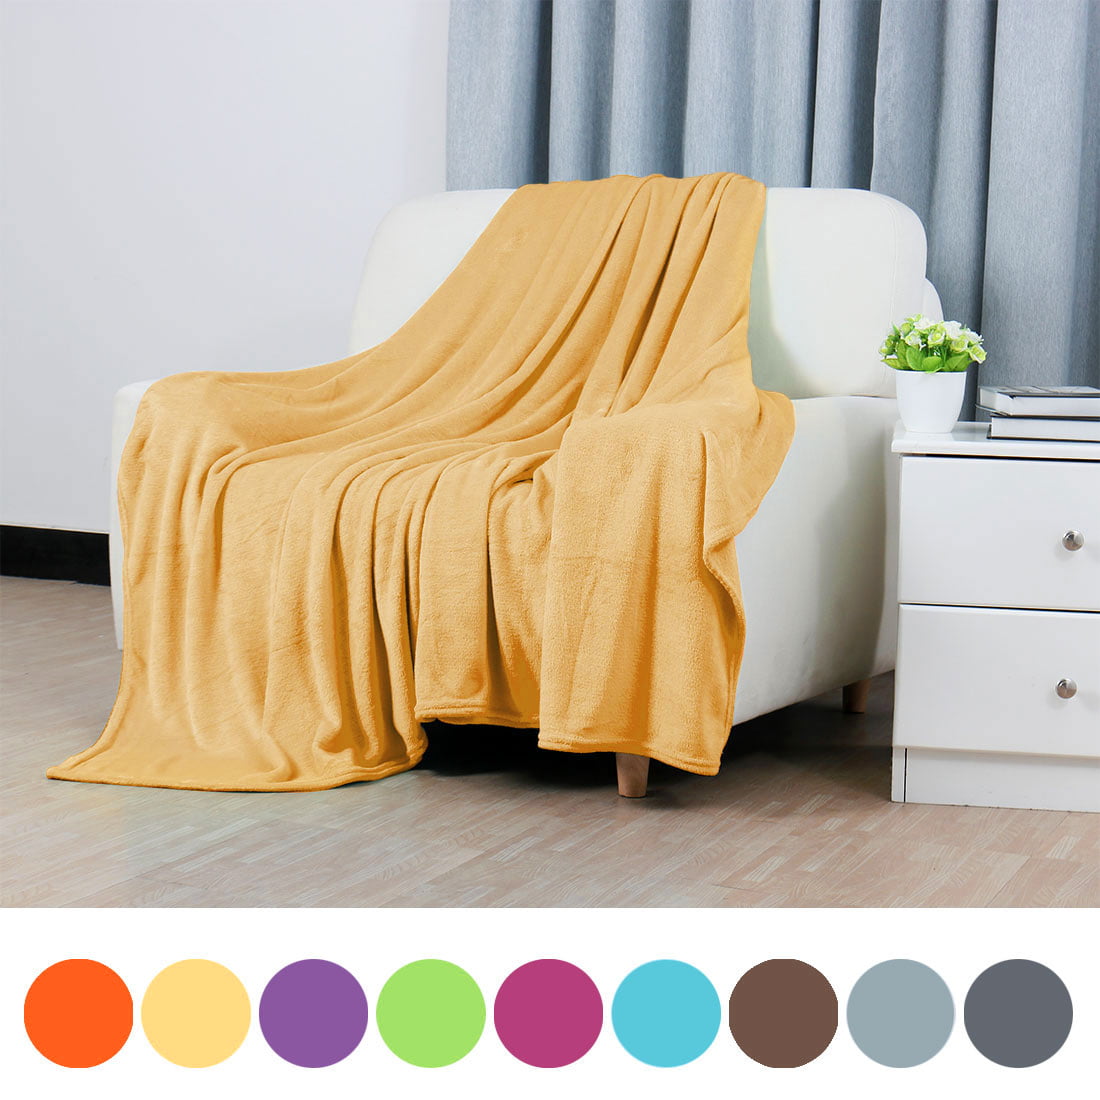 Queen King Sizes Multicolor Soft Flannel Throw Warm Sofa Bed Blanket Rug Carpet 